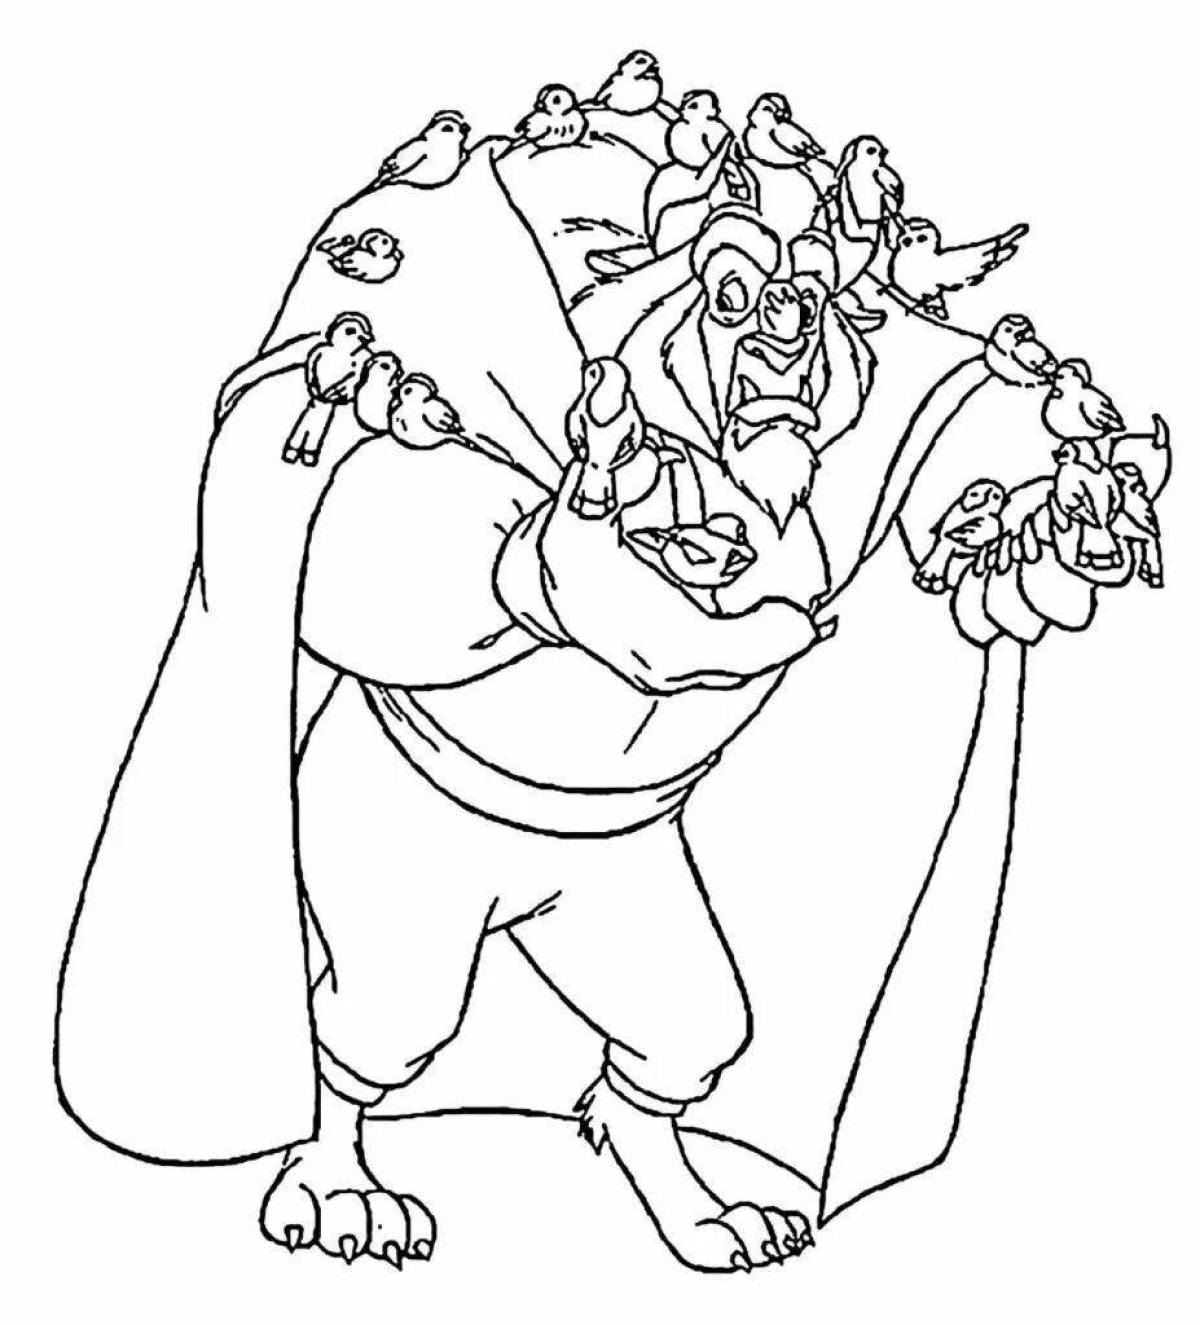 Gorgeous belle and the monster coloring page